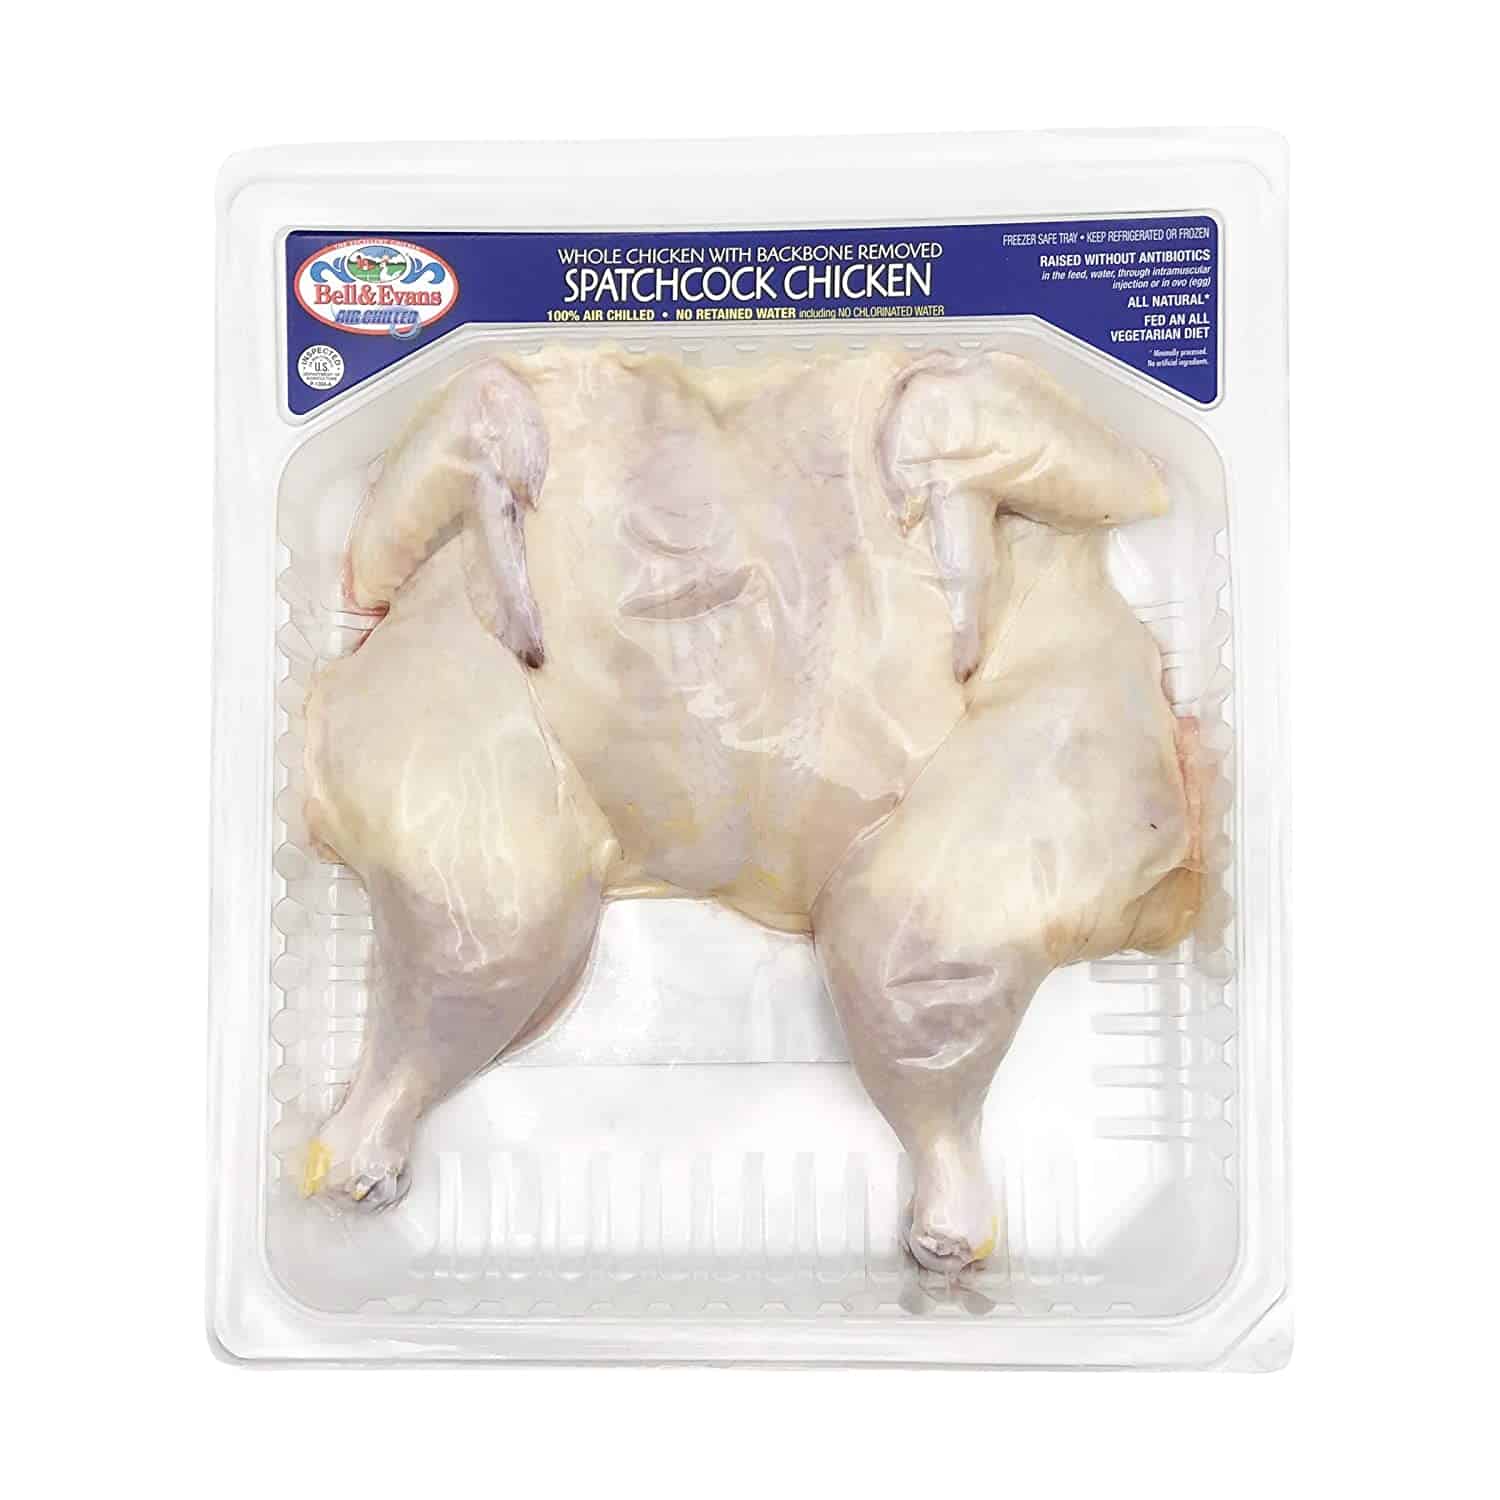 Oasis Fresh Bell and Evans Whole Chicken Spatchcock Per 3.5LB